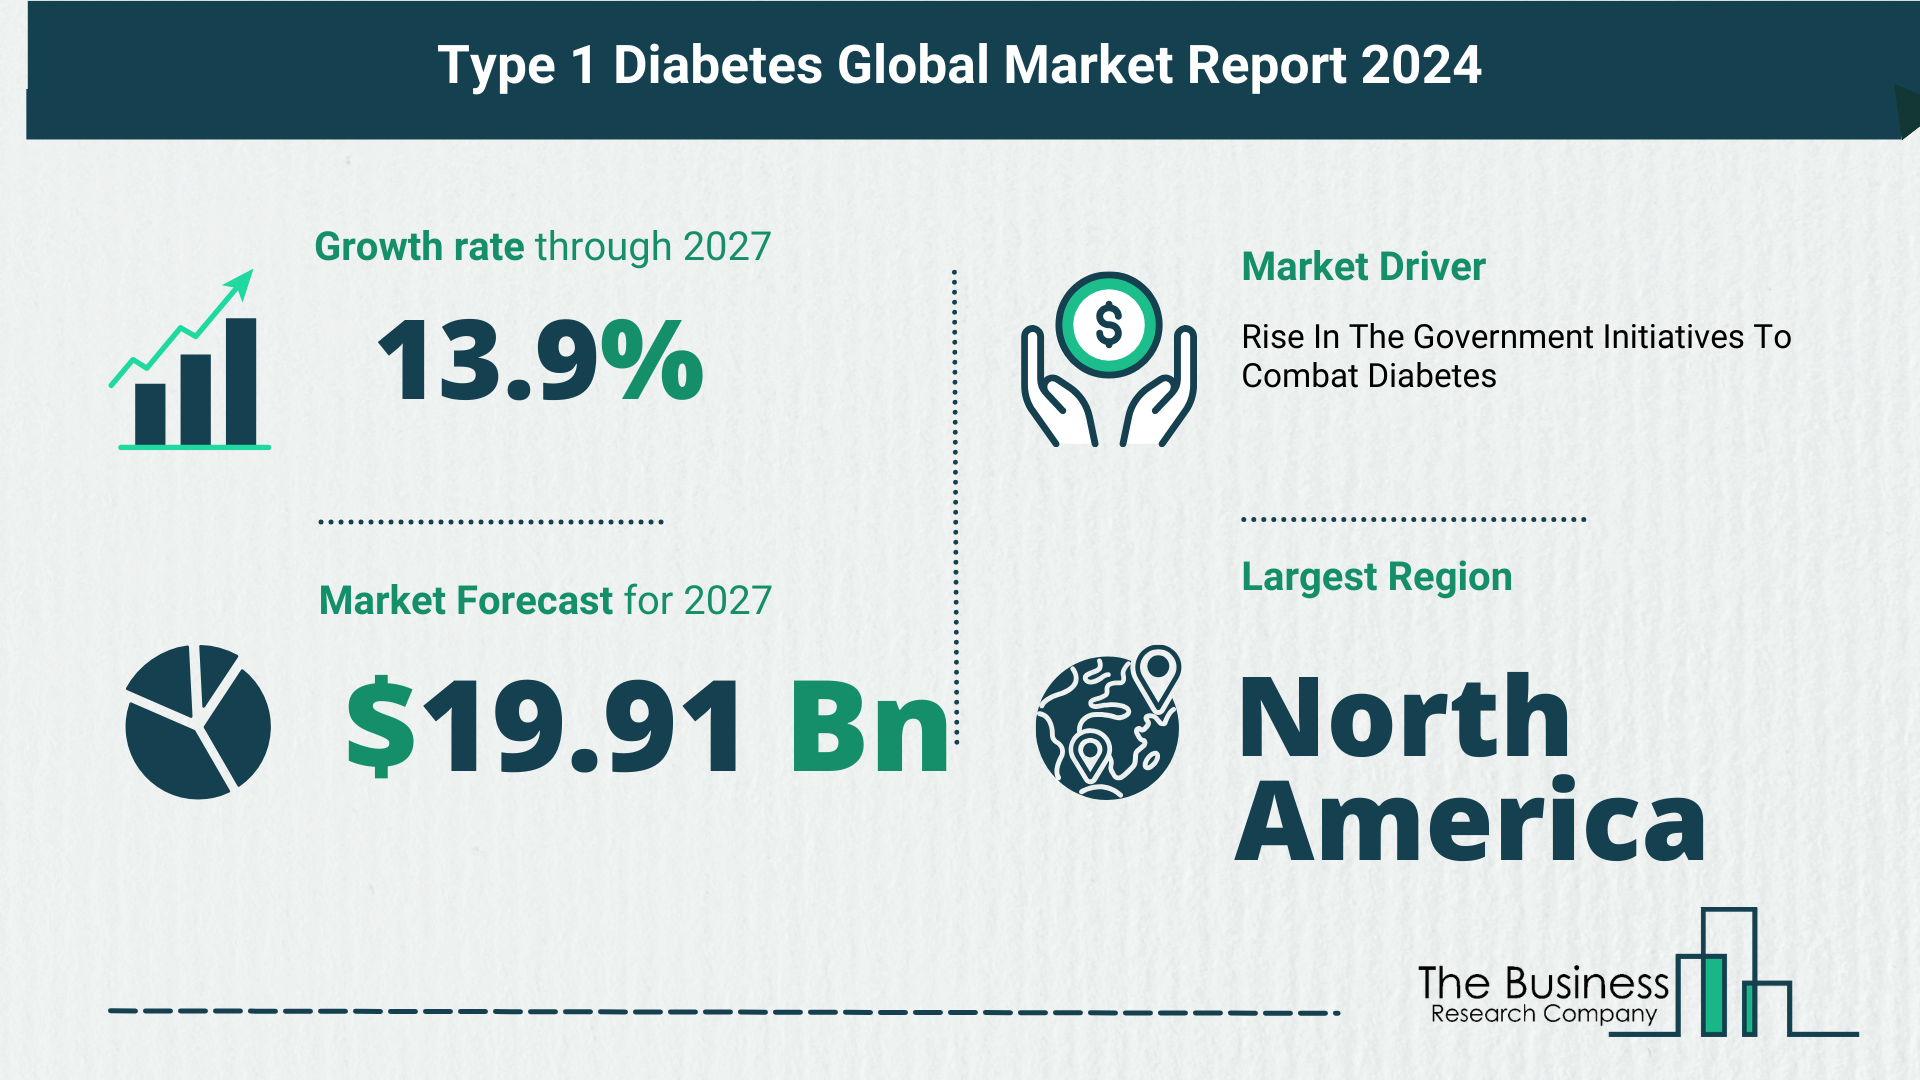 Top 5 Insights From The Type 1 Diabetes Market Report 2023